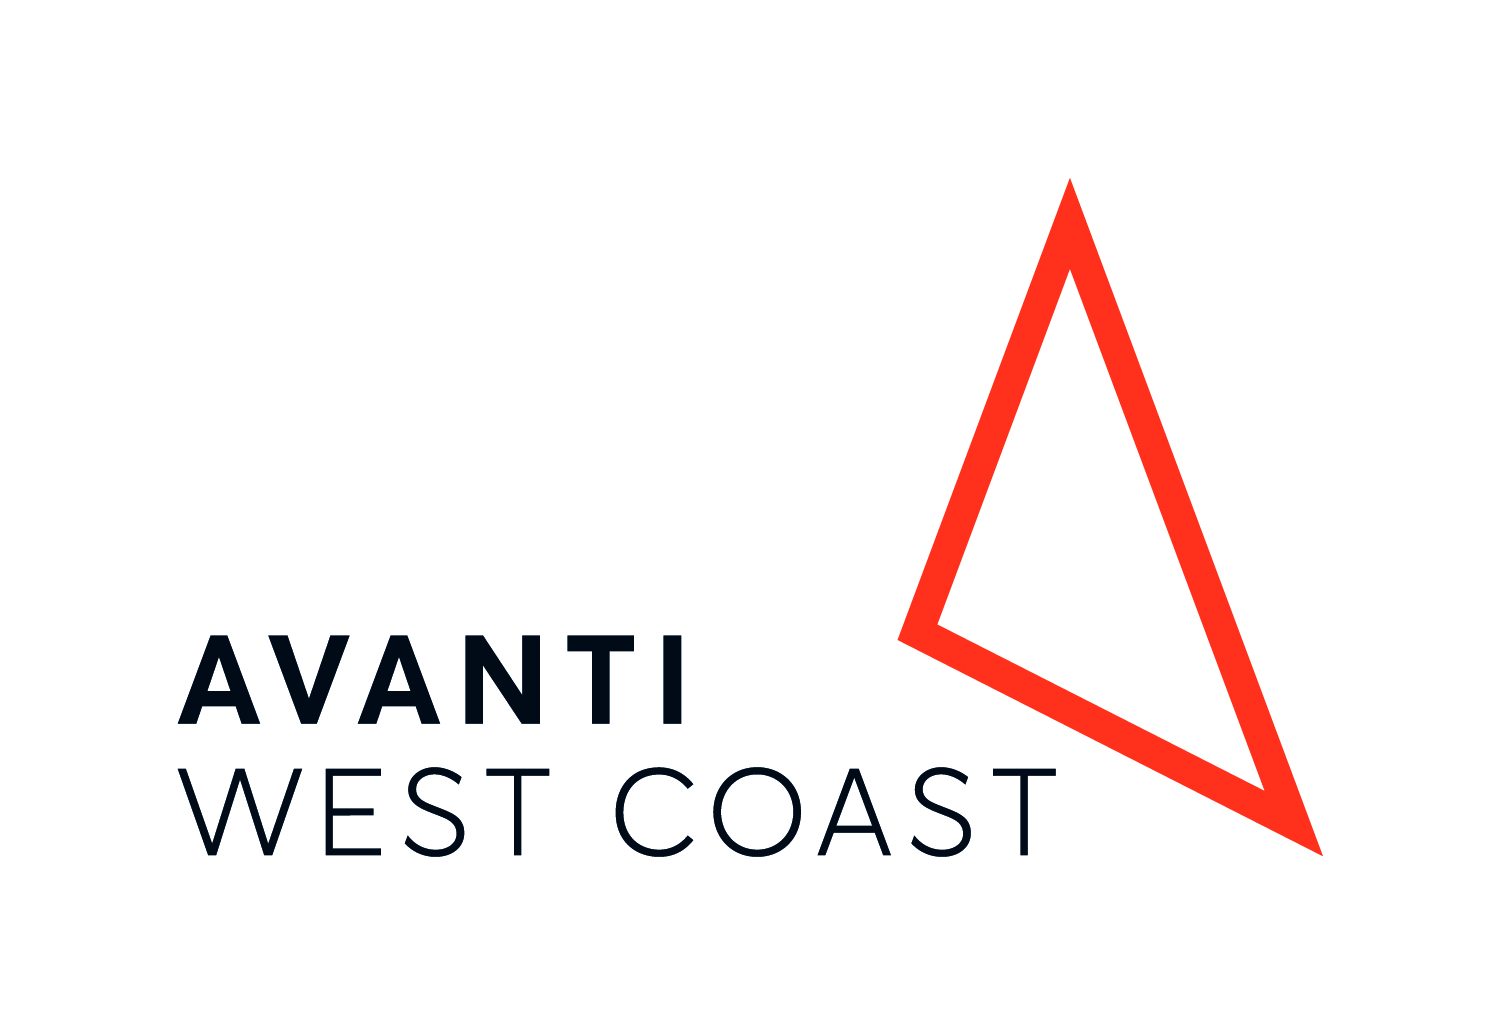 The Avanti West Coast logo symbolises its 400-mile network which links London with towns and cities across England, North Wales and Scotland (Avanti West Coast/PA)